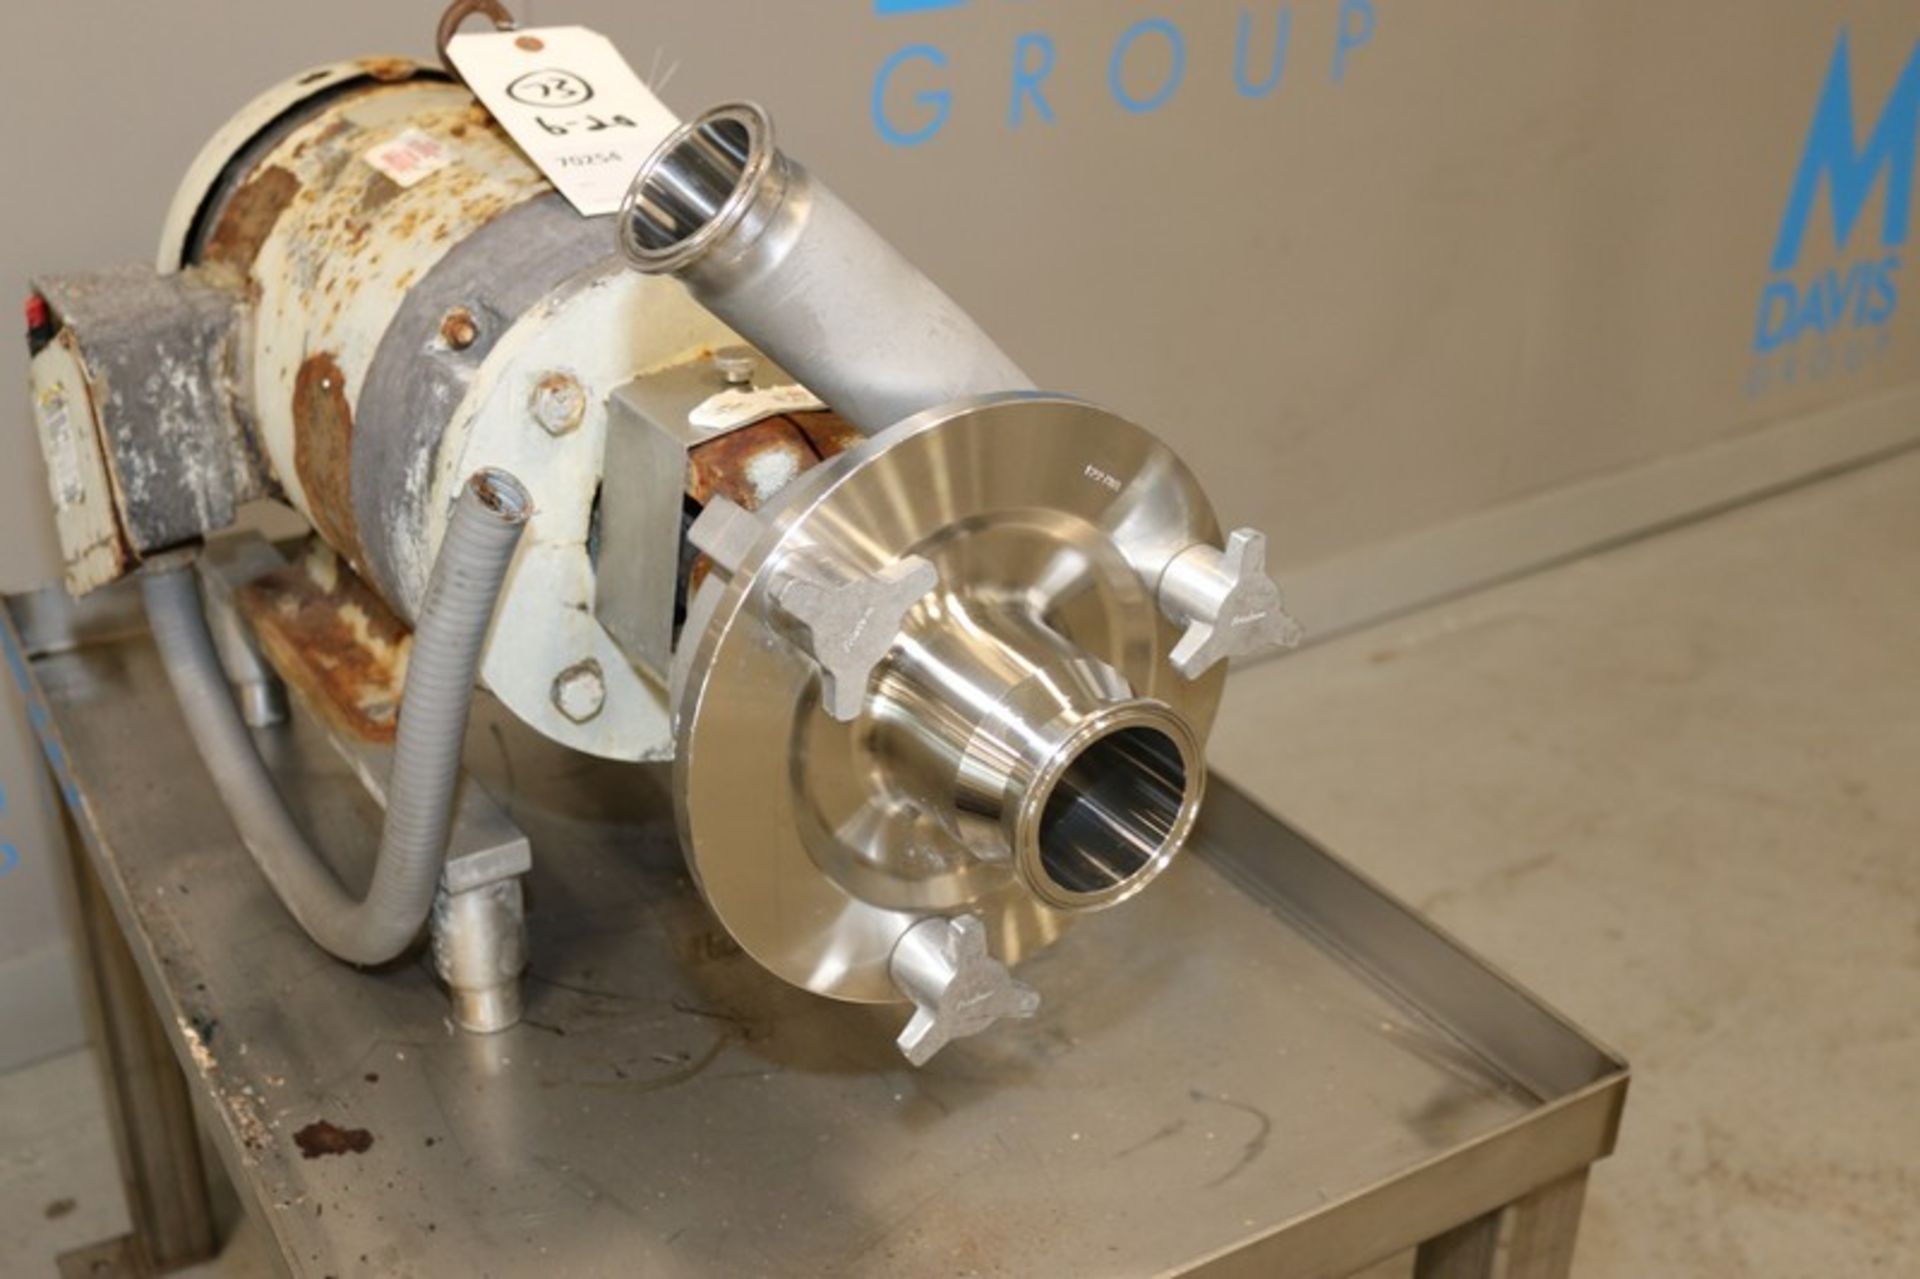 Fristam Aprox. 10 hp Centrifugal Pump, M/N FPX3522-125, S/N FPX35220401454, with Aprox. 2" x 3" - Image 3 of 7